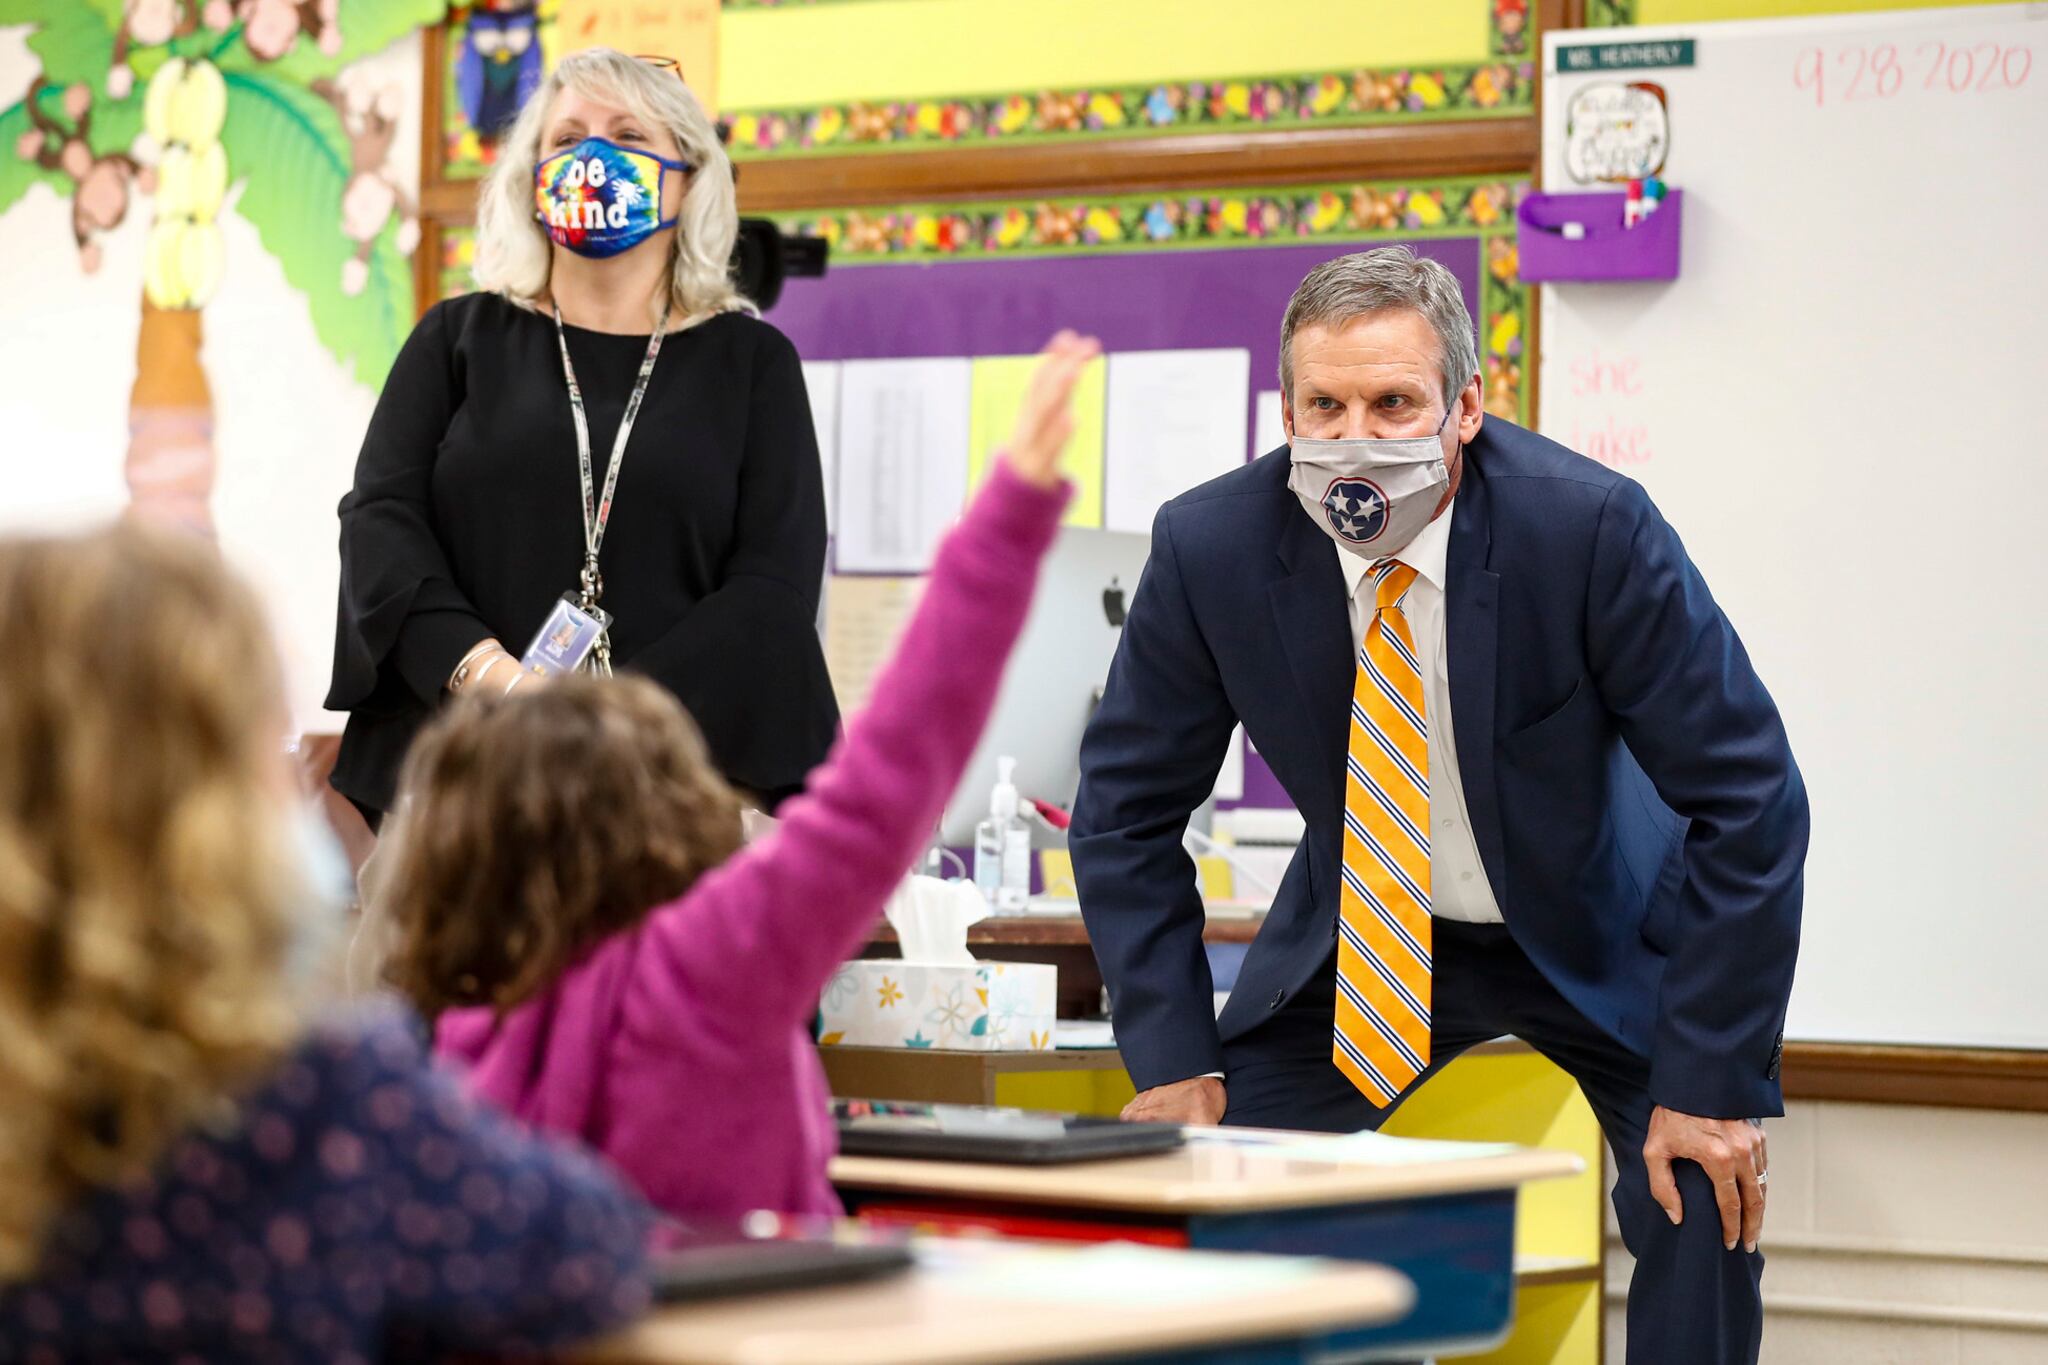 Gov. Bill Lee squats to talk to elementary students at the front of the classroom while students raise their hands.